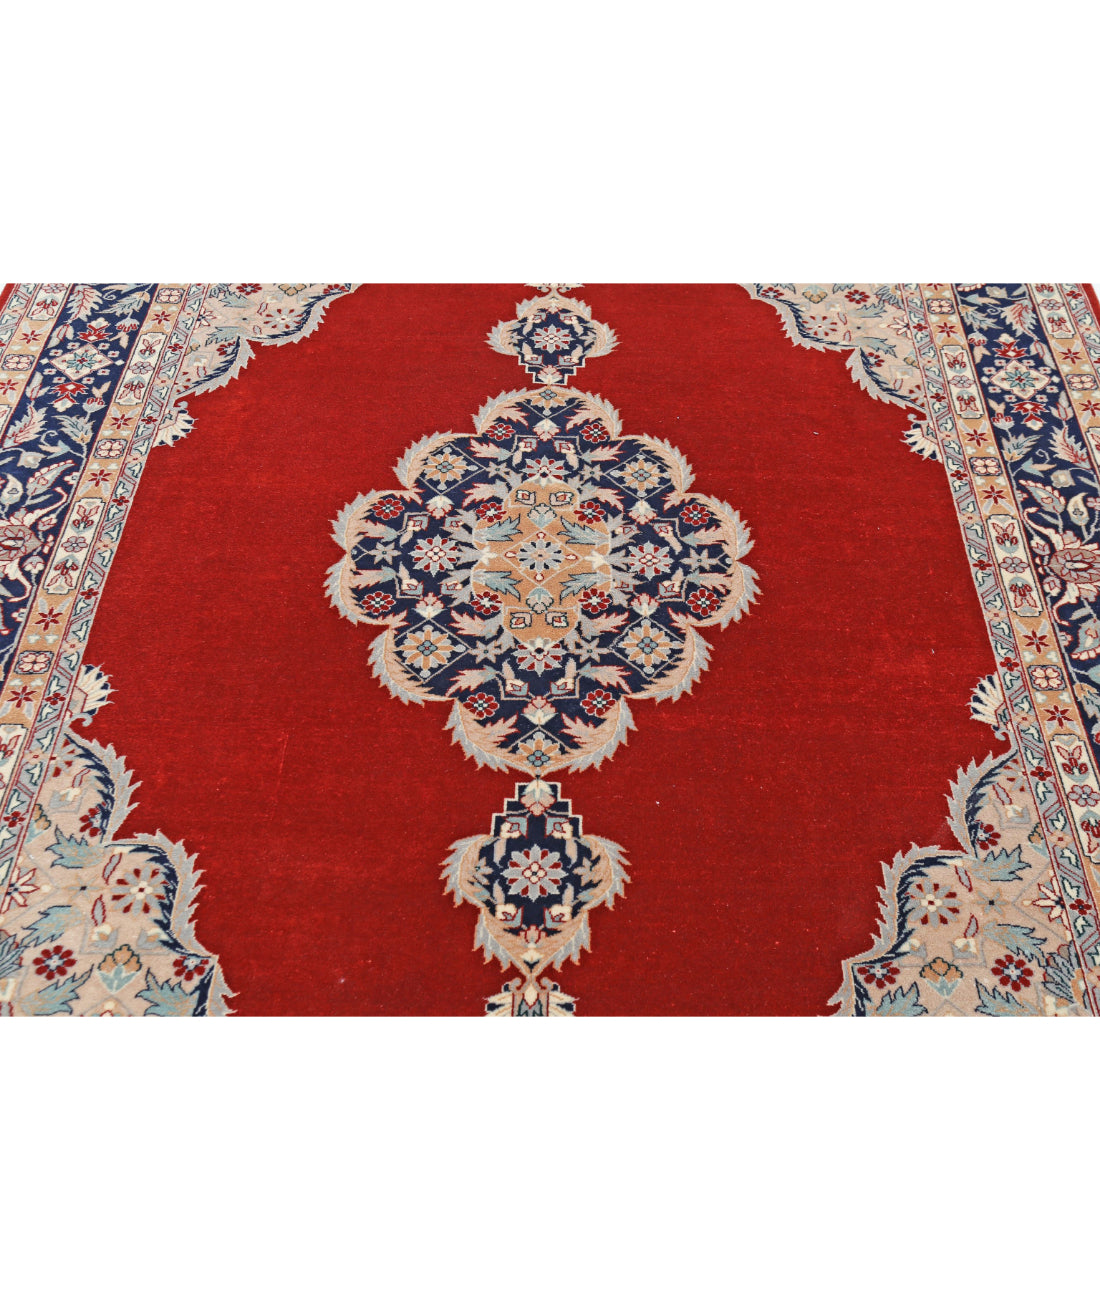 Heritage 6'0'' X 8'11'' Hand-Knotted Wool Rug 6'0'' x 8'11'' (180 X 268) / Red / Blue